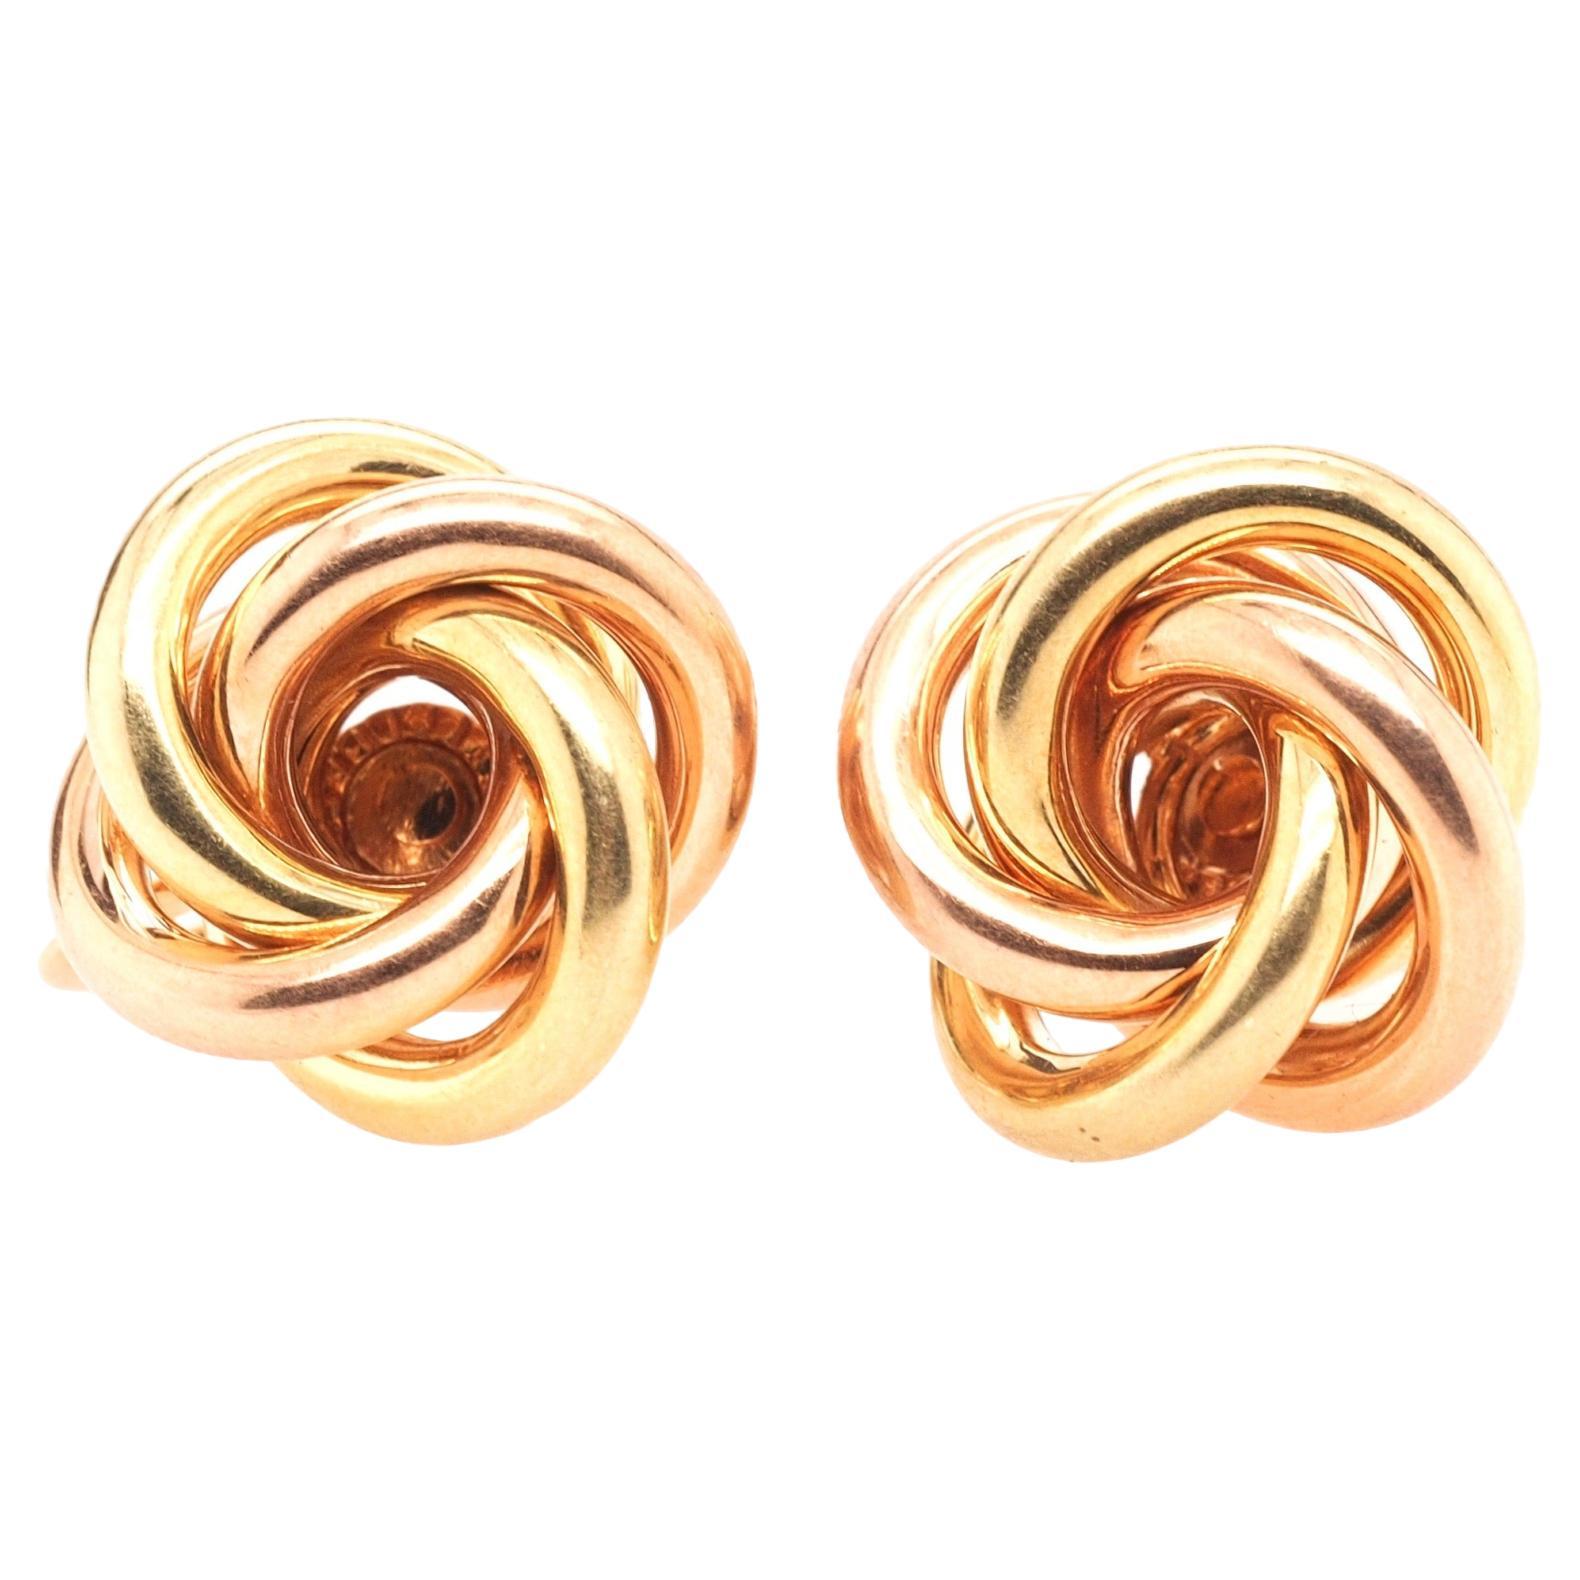 Circa 1950s Tiffany & Co 14K Yellow and Rose Gold Knot Earrings For Sale